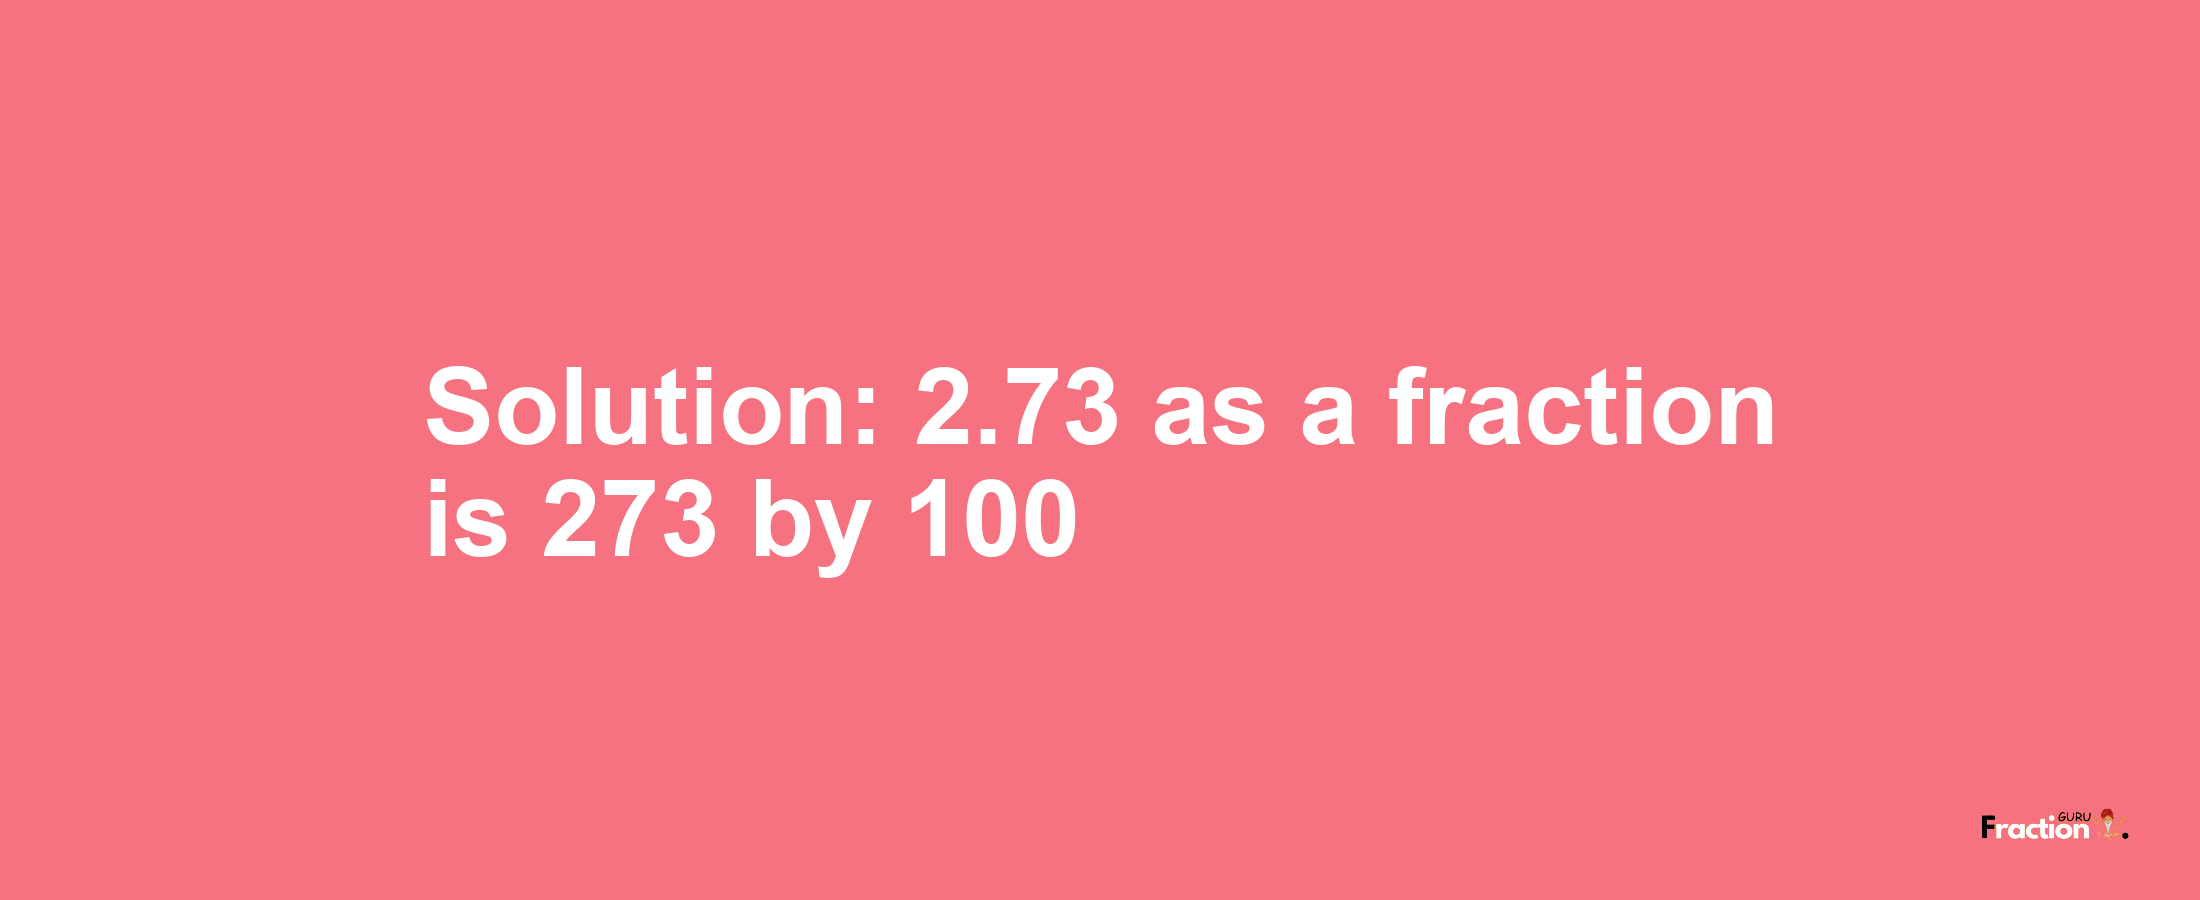 Solution:2.73 as a fraction is 273/100